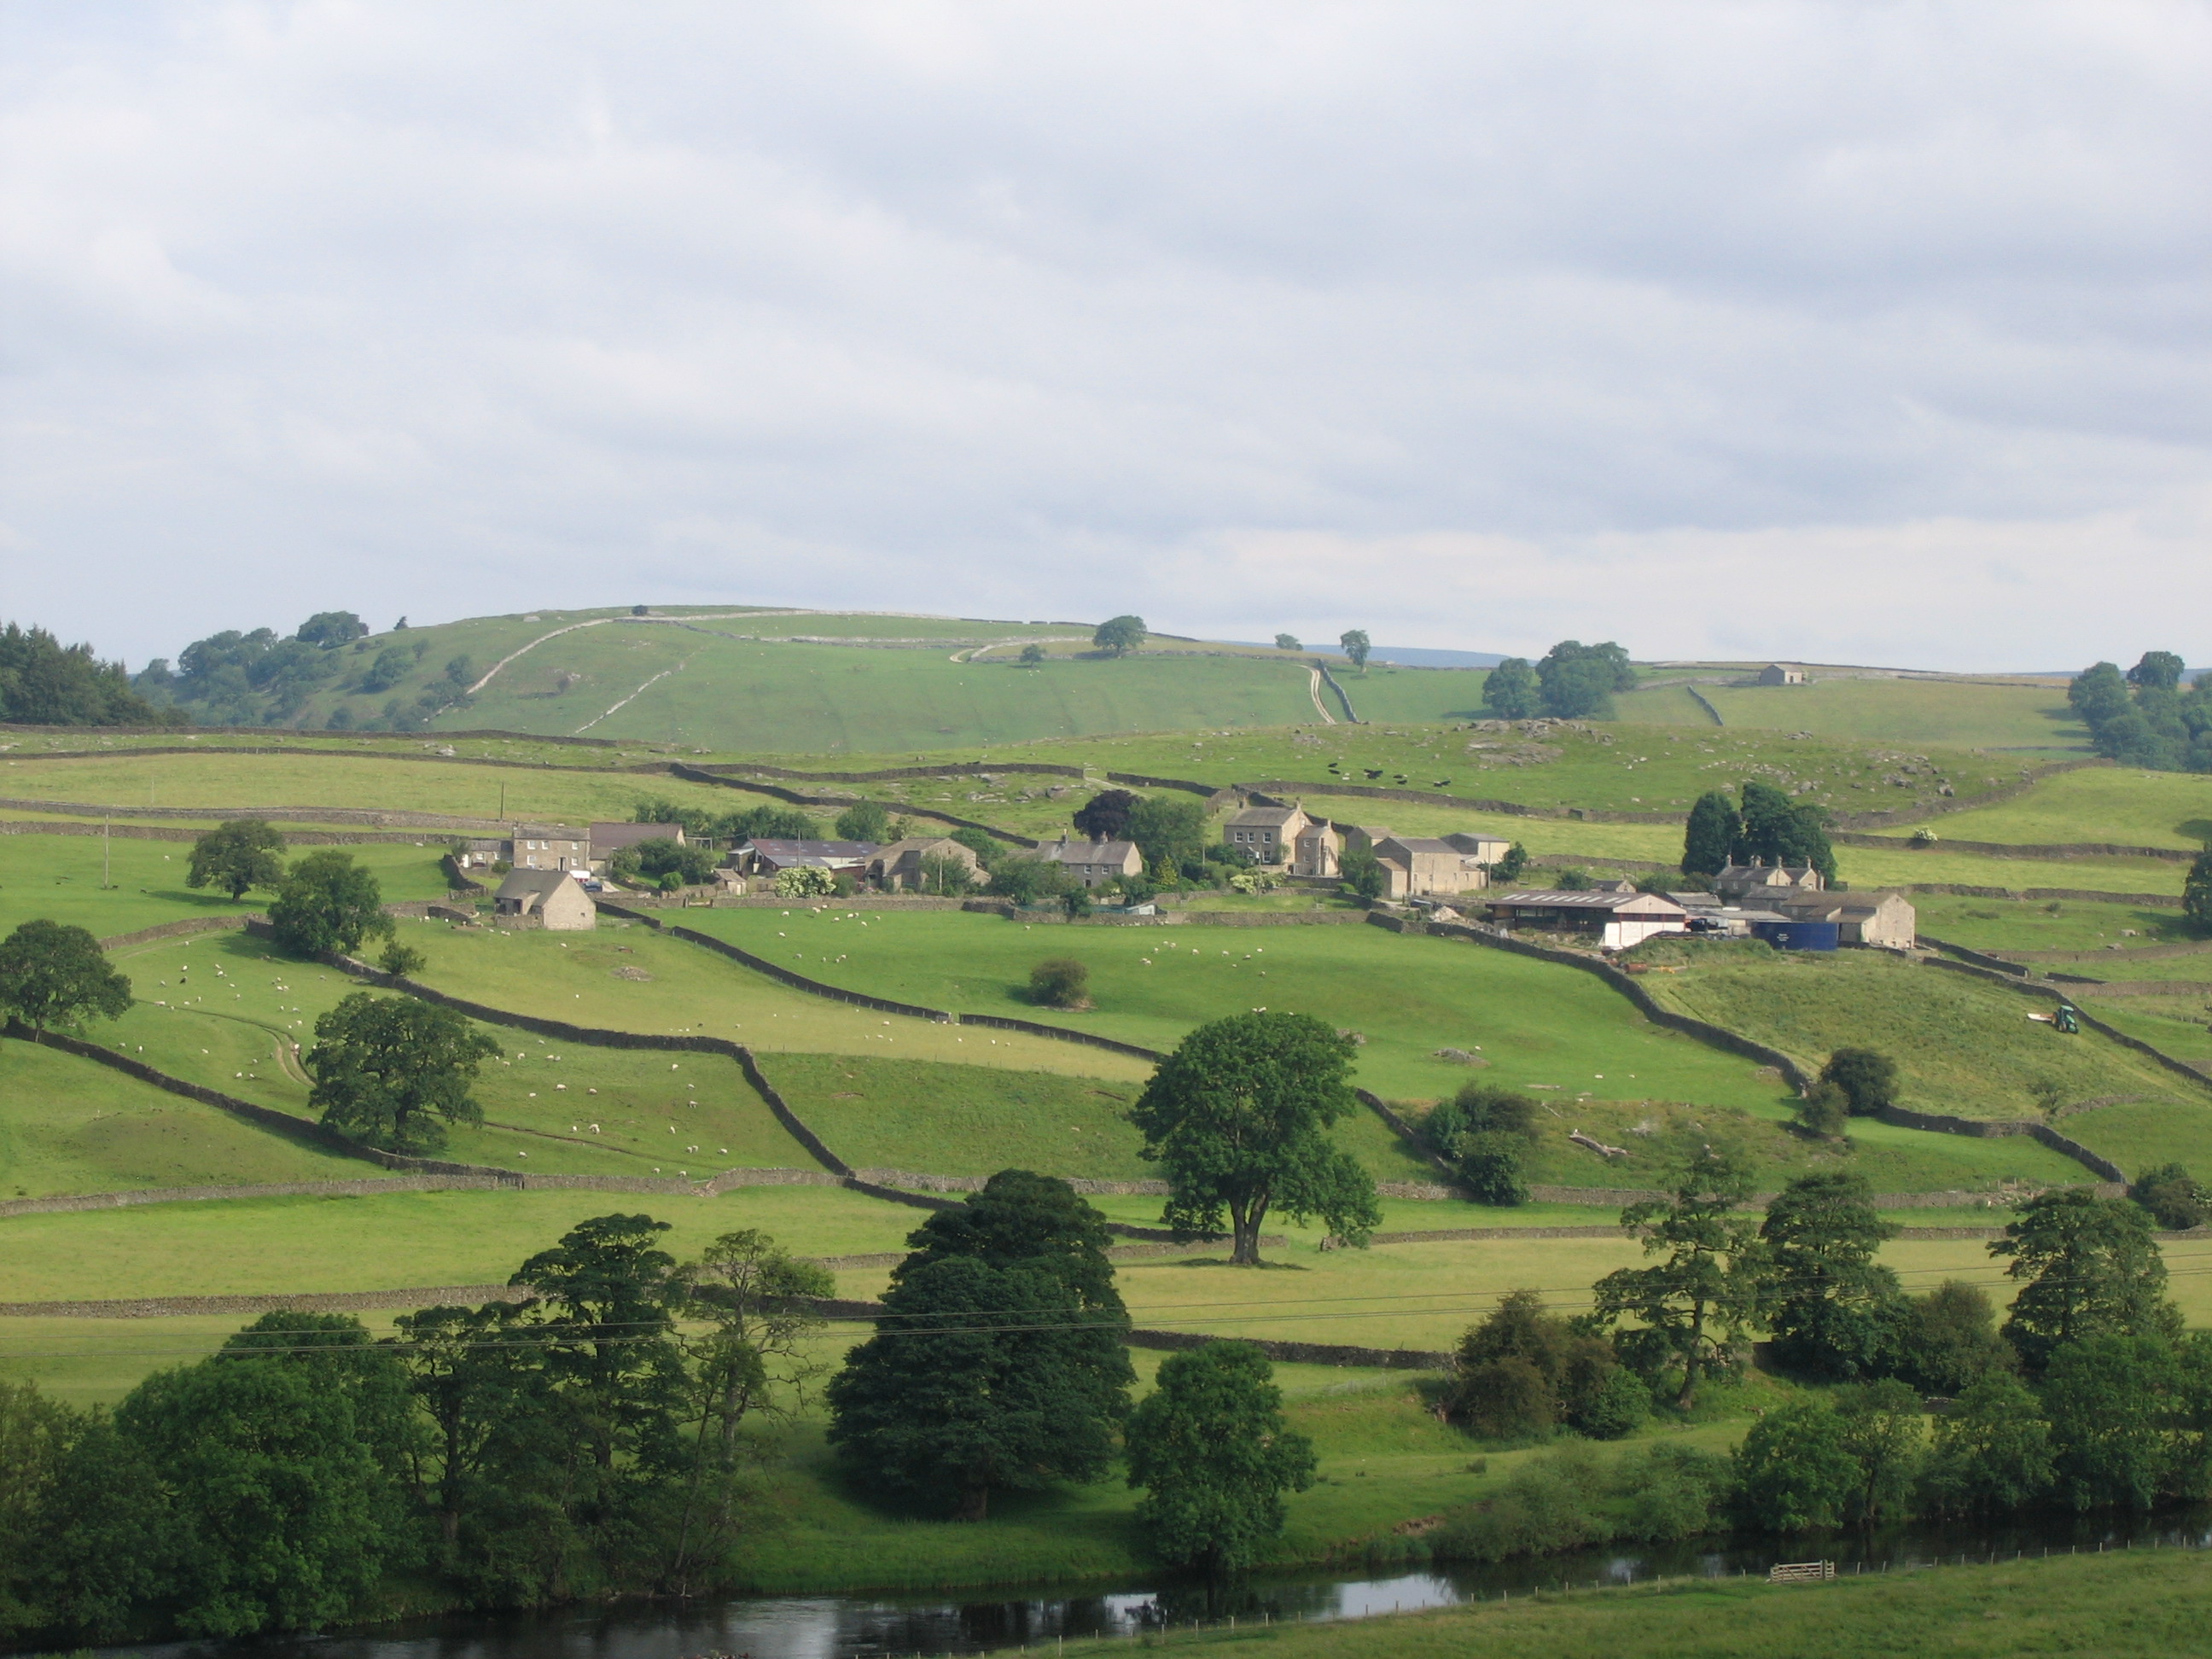 Village of Drebley in Yorkshire Dales National Park viewed from the SE across a river in the foreground.